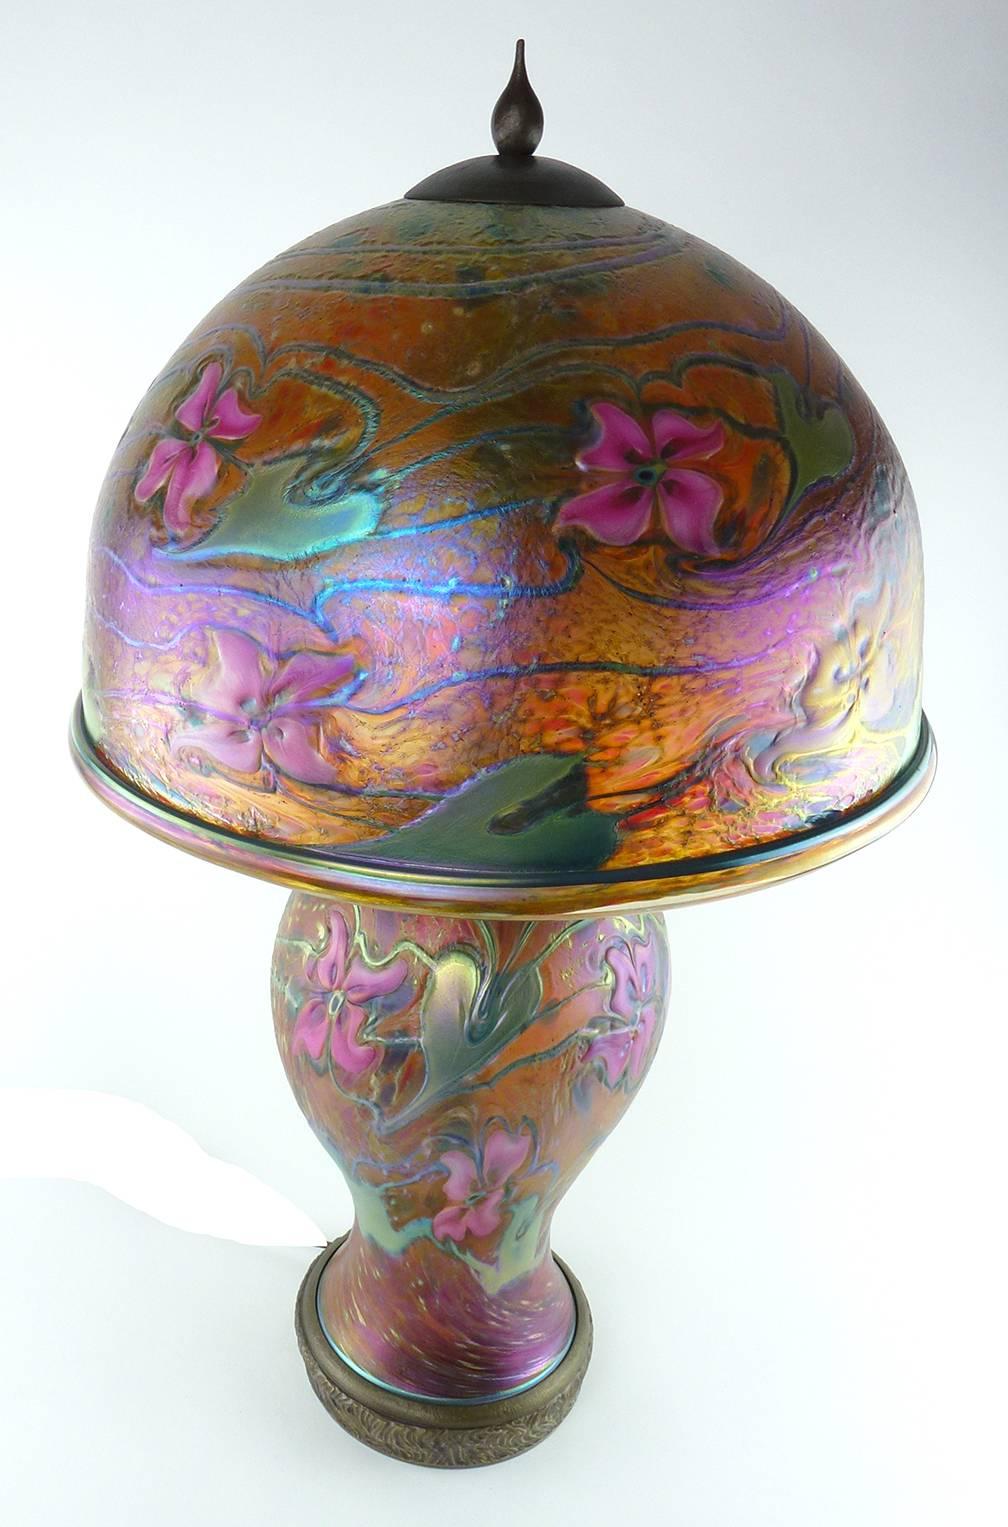 Charles Lotton Contemporary Studio art blown glass orange pink table lamp

Charles Lotton (B. 1935) Contemporary Studio art blown glass table lamp dated 2006, the dome-shaped shade over the baluster form base, with brass fittings, the glass of